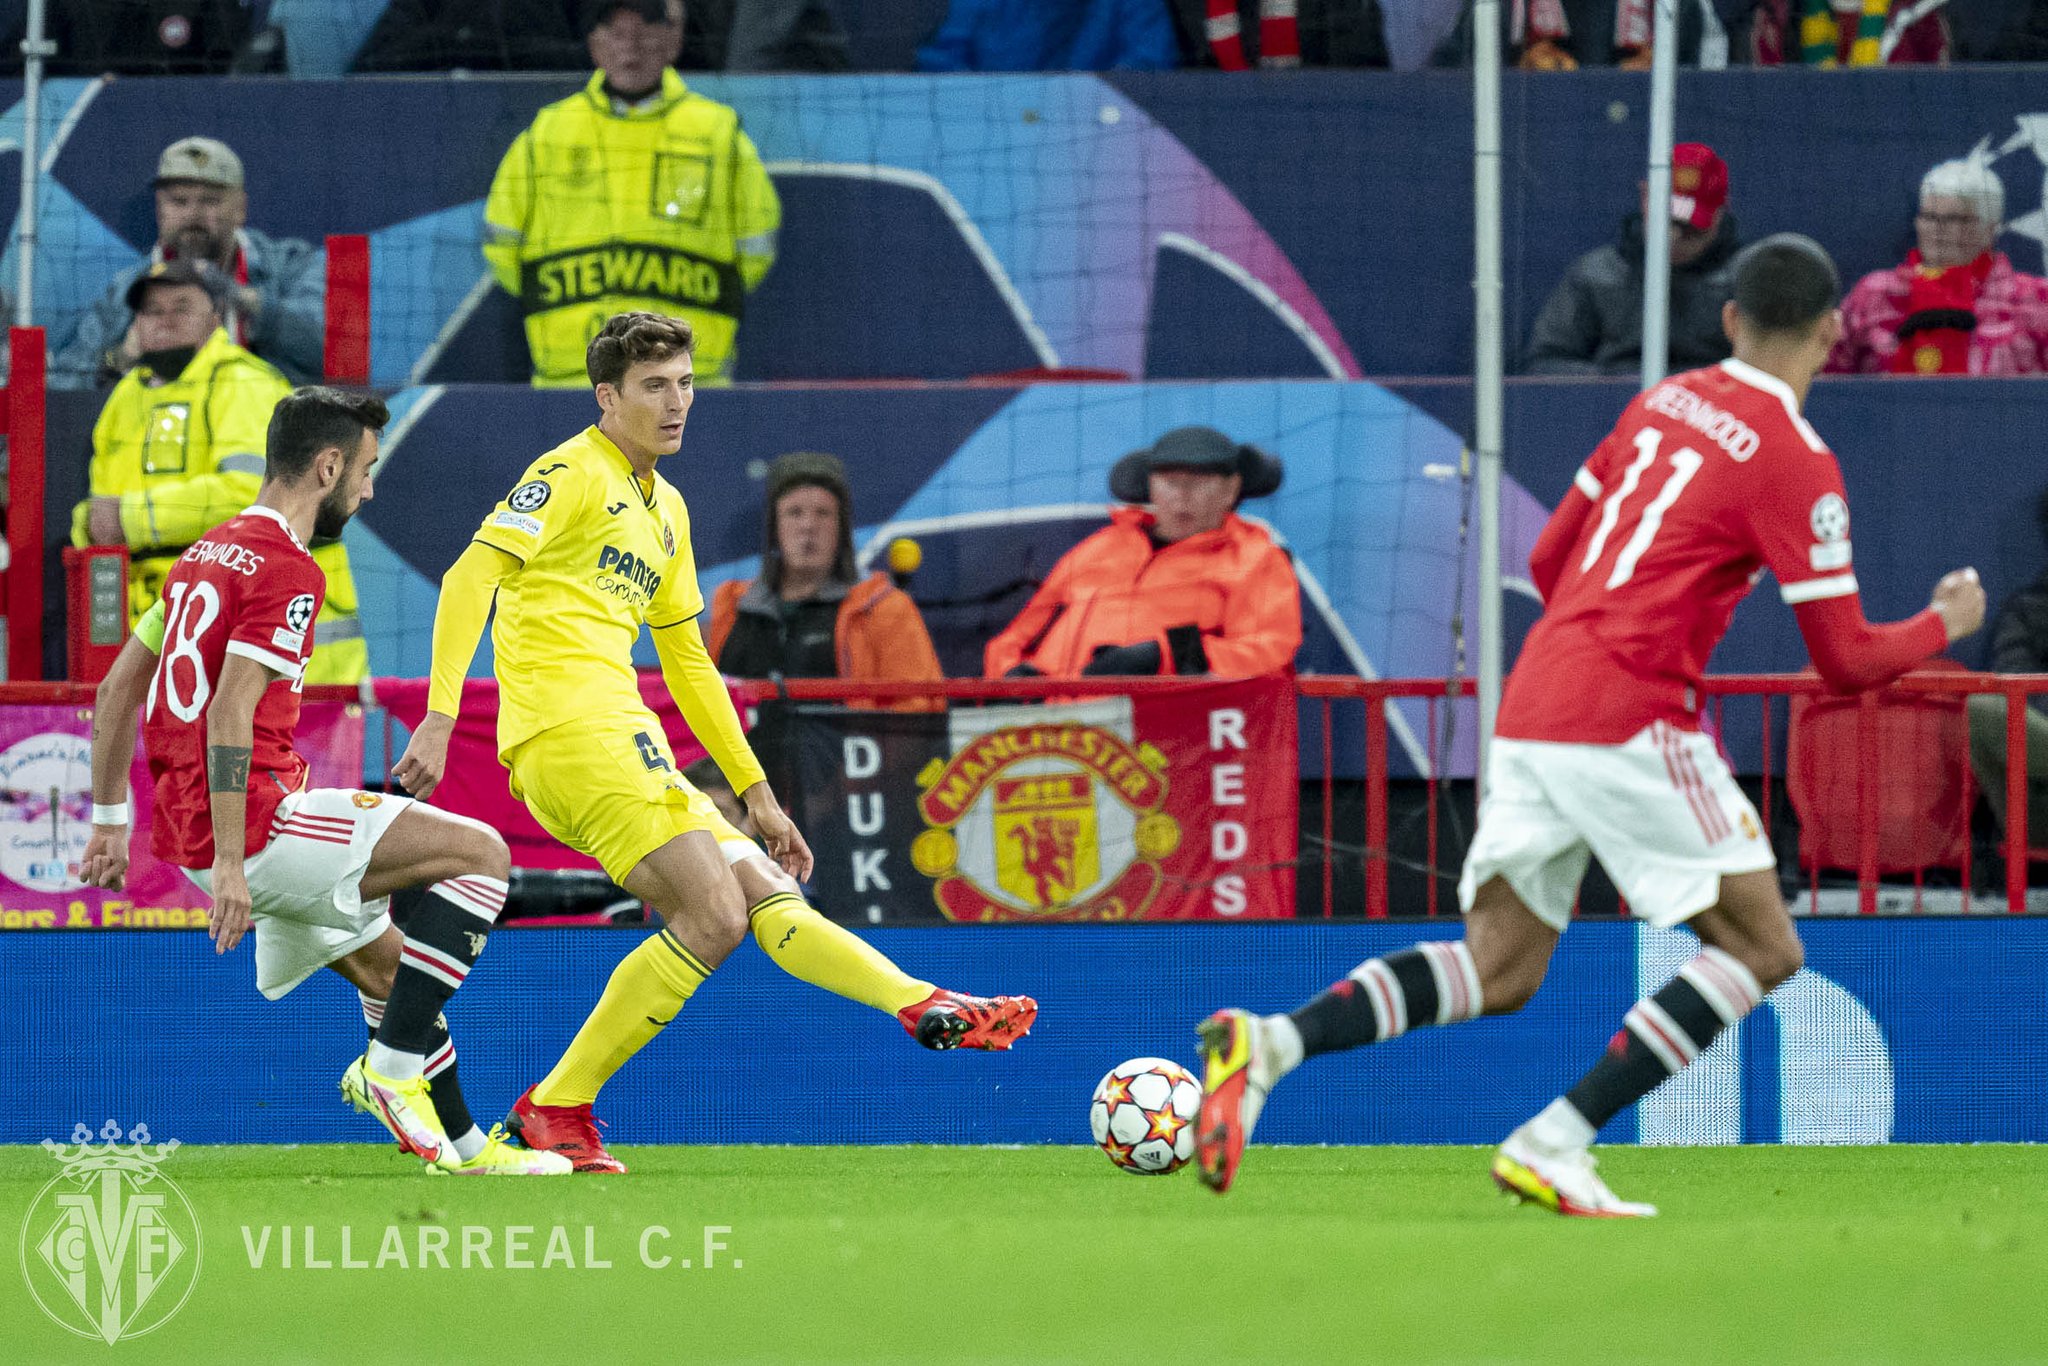 A strong confrontation between Man United against Villarreal